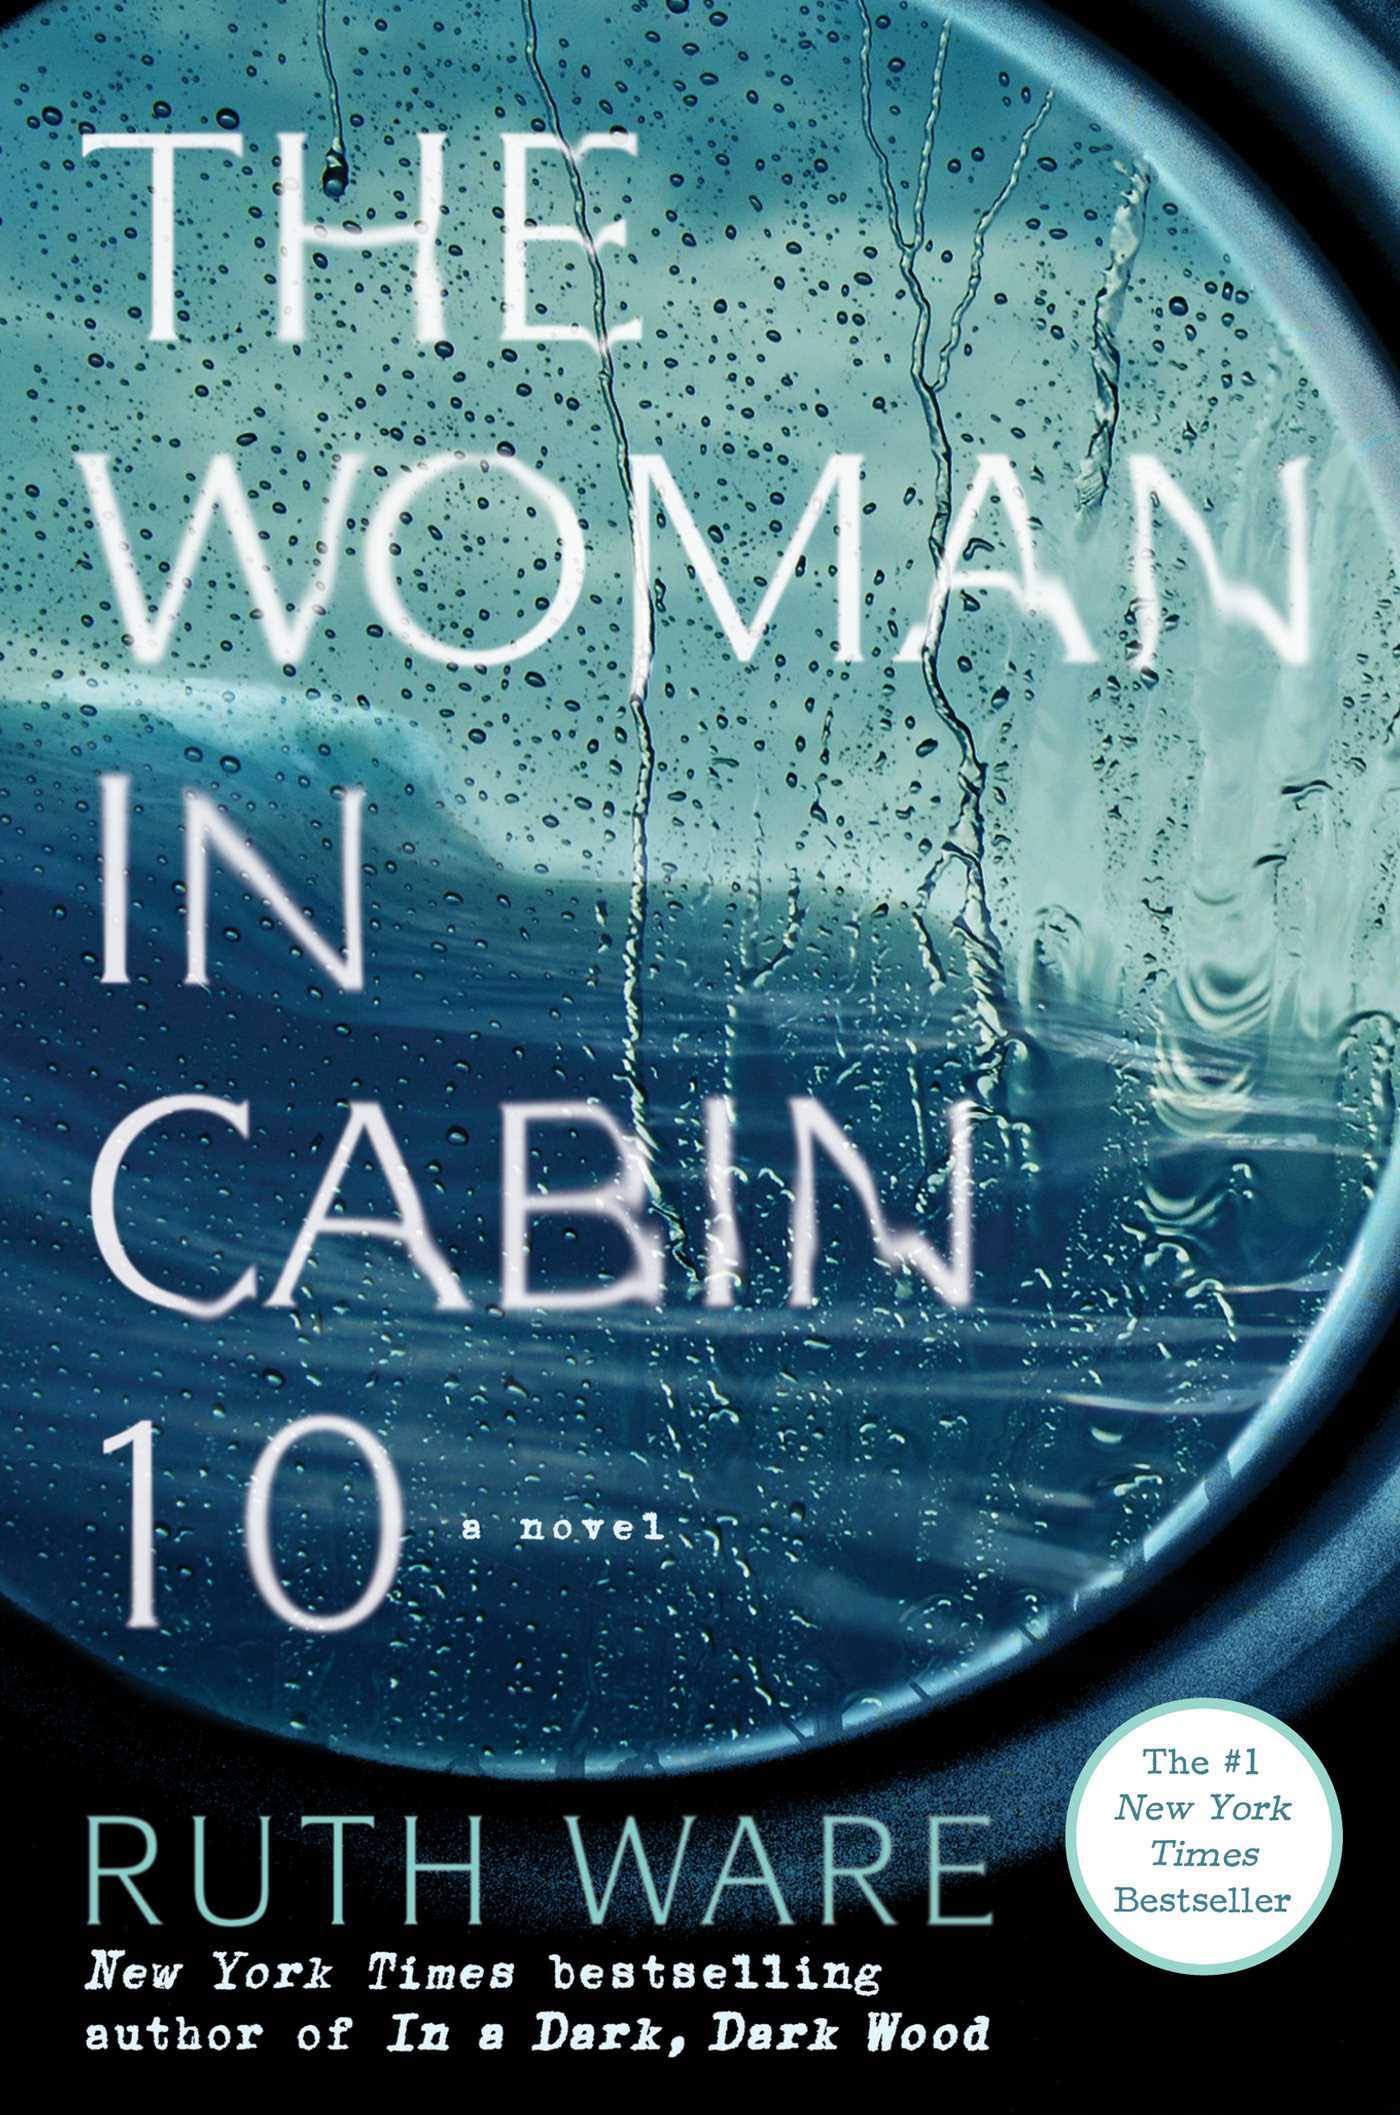 The Woman in Cabin 10 [Book]